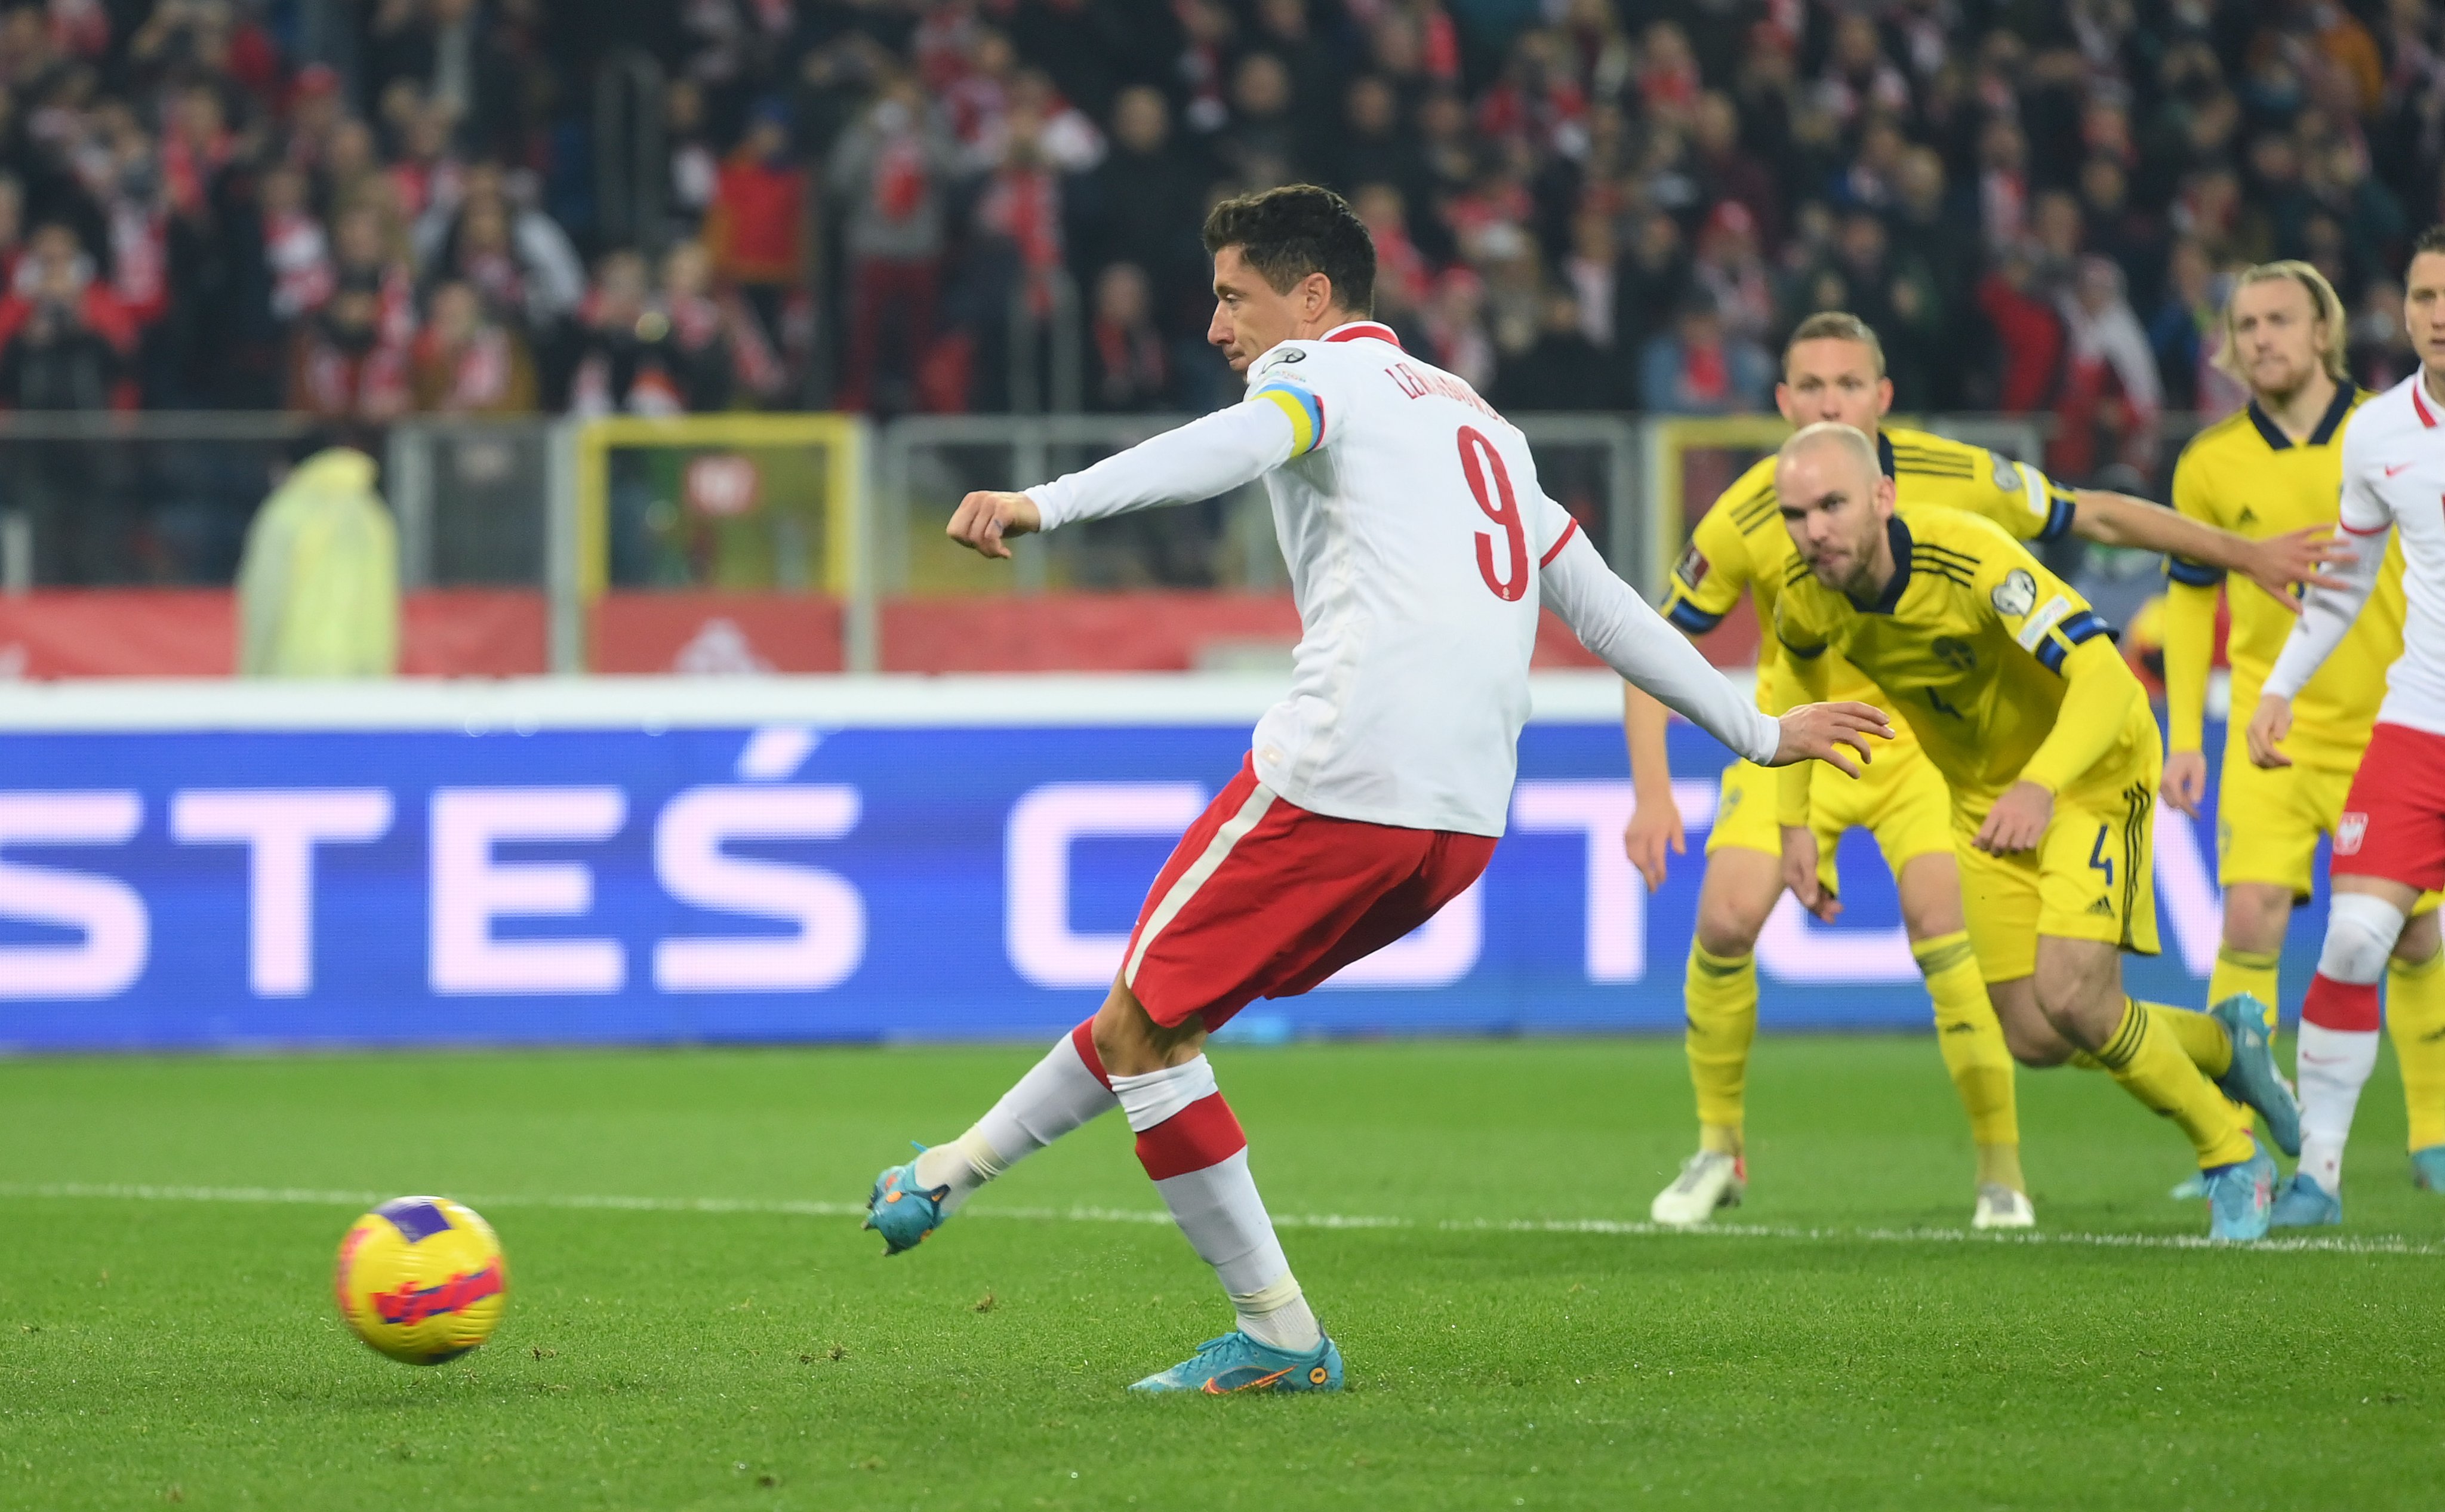 Poland 2-0 Sweden Highlights: Robert Lewandowski and Poland book their place in the FIFA World Cup as Ibrahimovic & Co. KNOCKED OUT in a 2-0 defeat